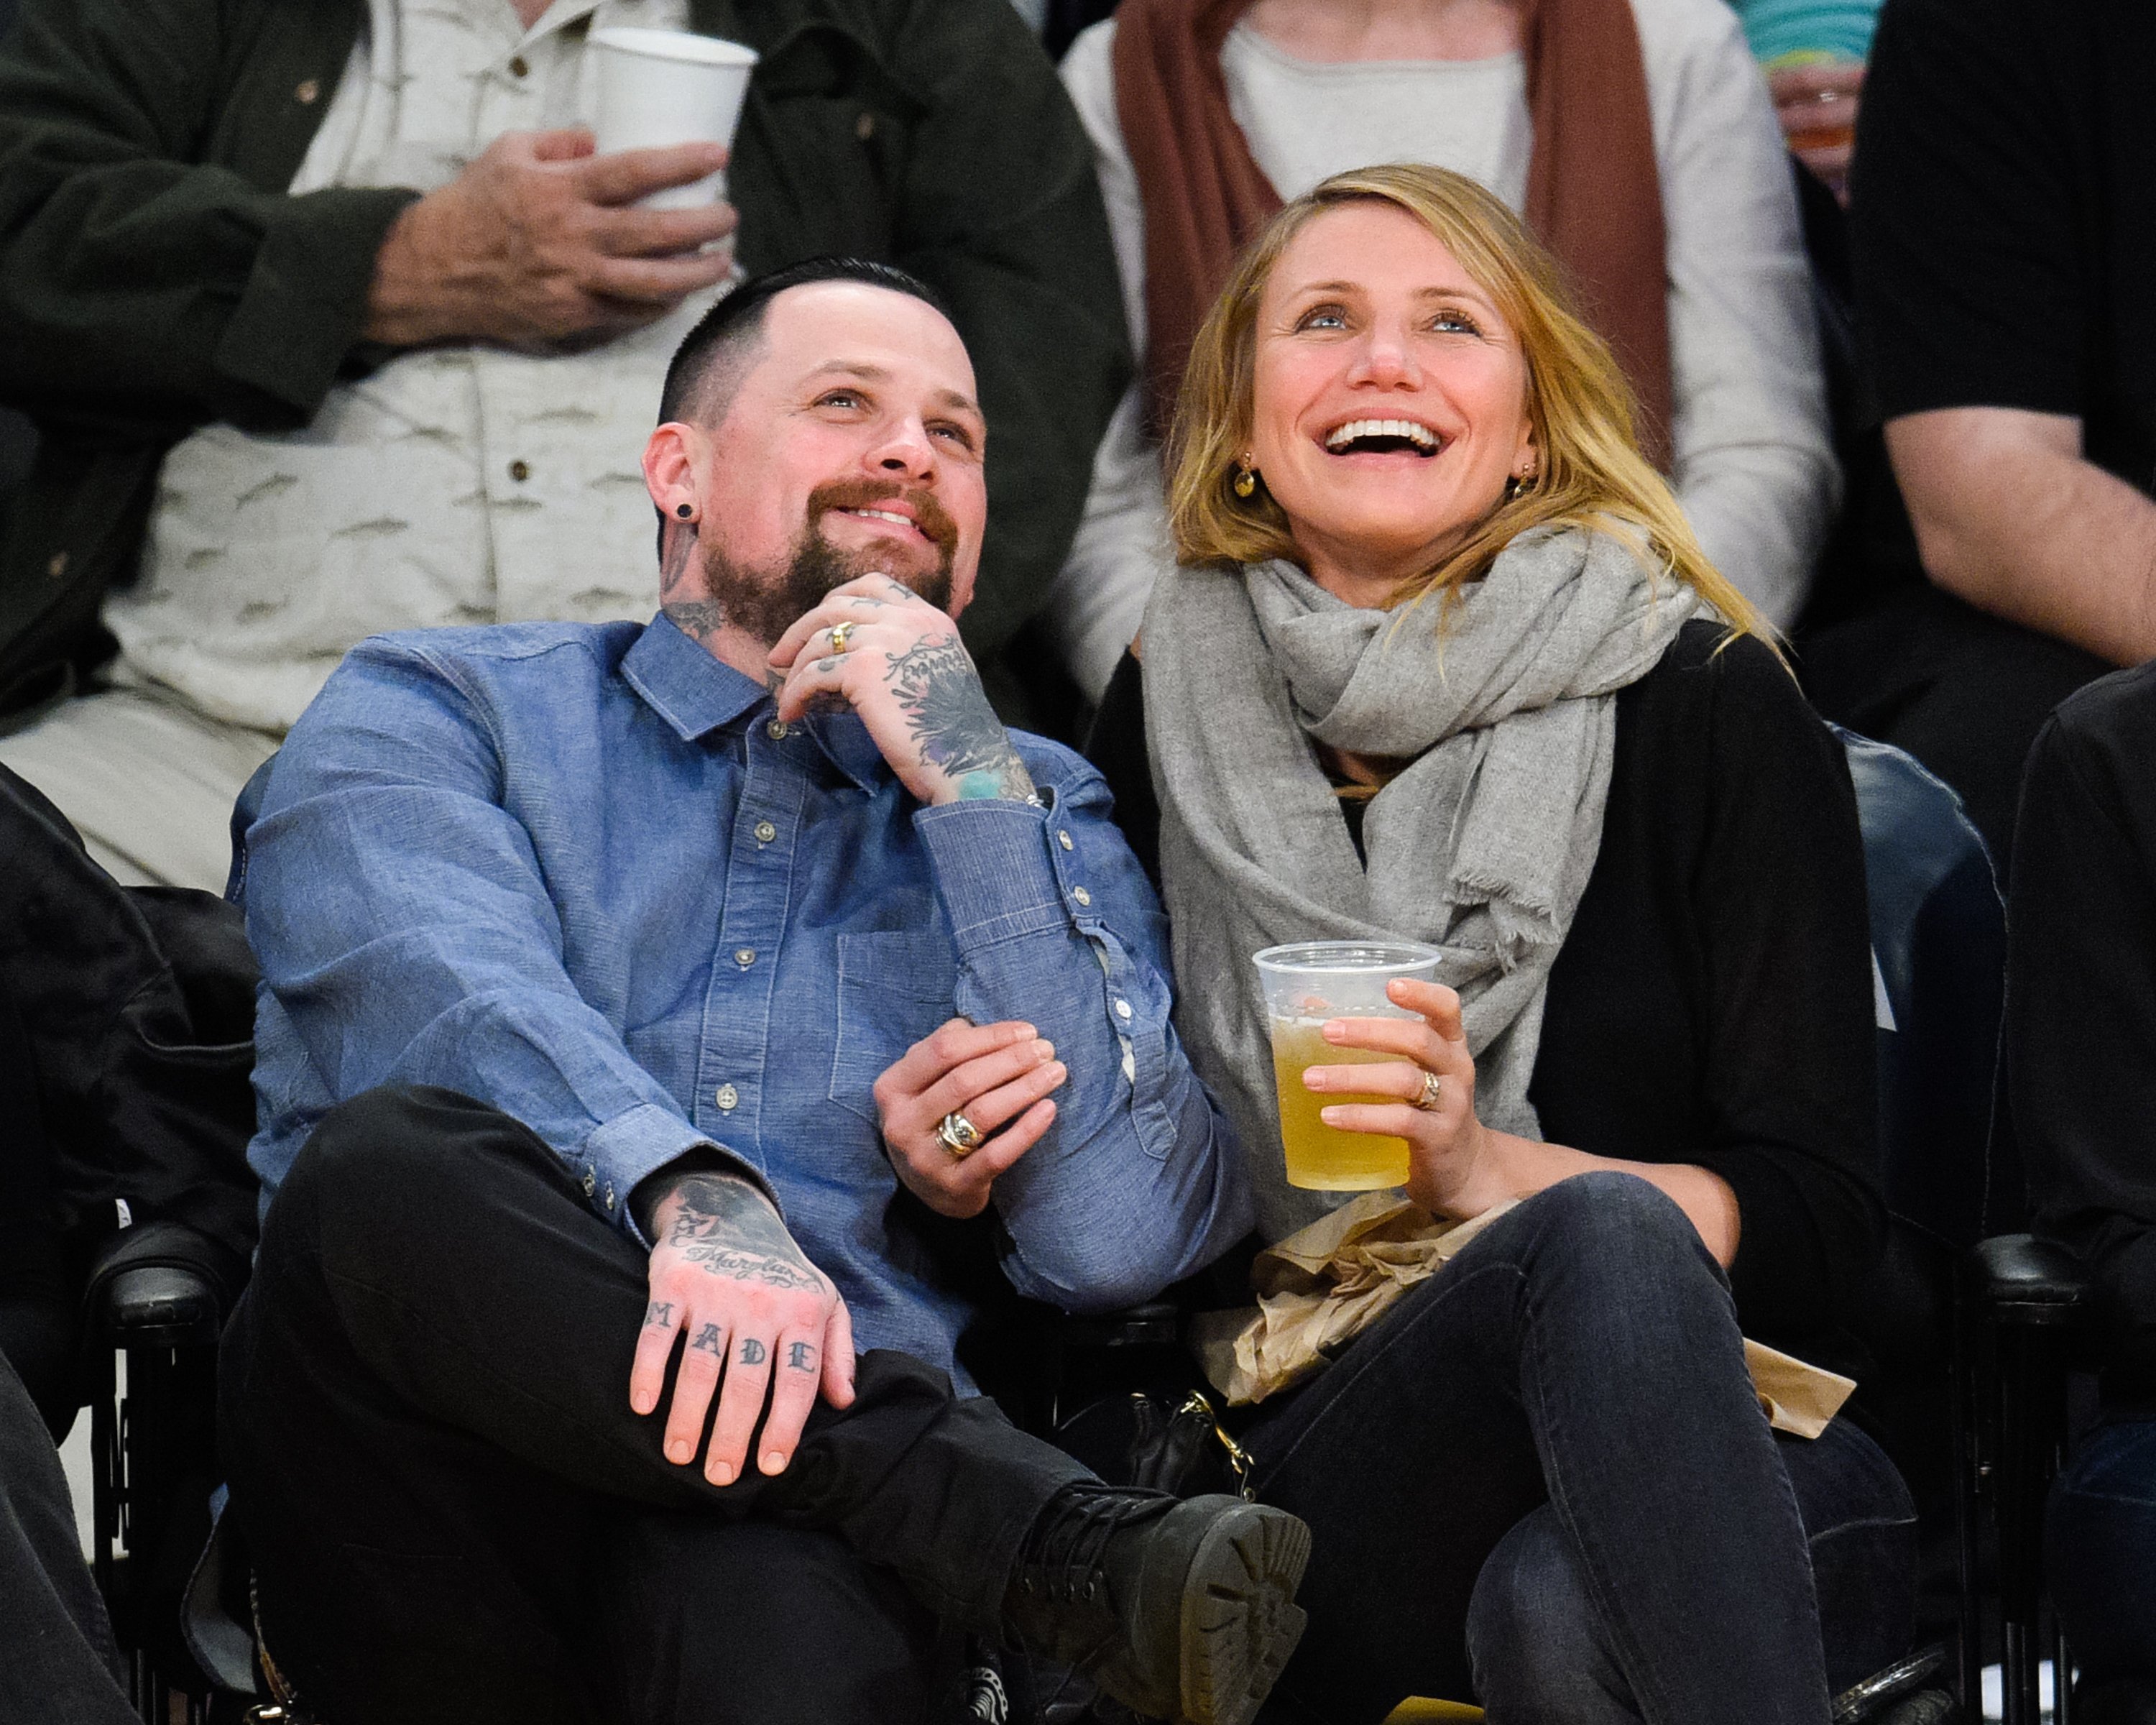 Benji Madden and Cameron Diaz attend a basketball game between the Washington Wizards and the Los Angeles Lakers at Staples Center on January 27, 2015, in Los Angeles, California. | Source: Getty Images.